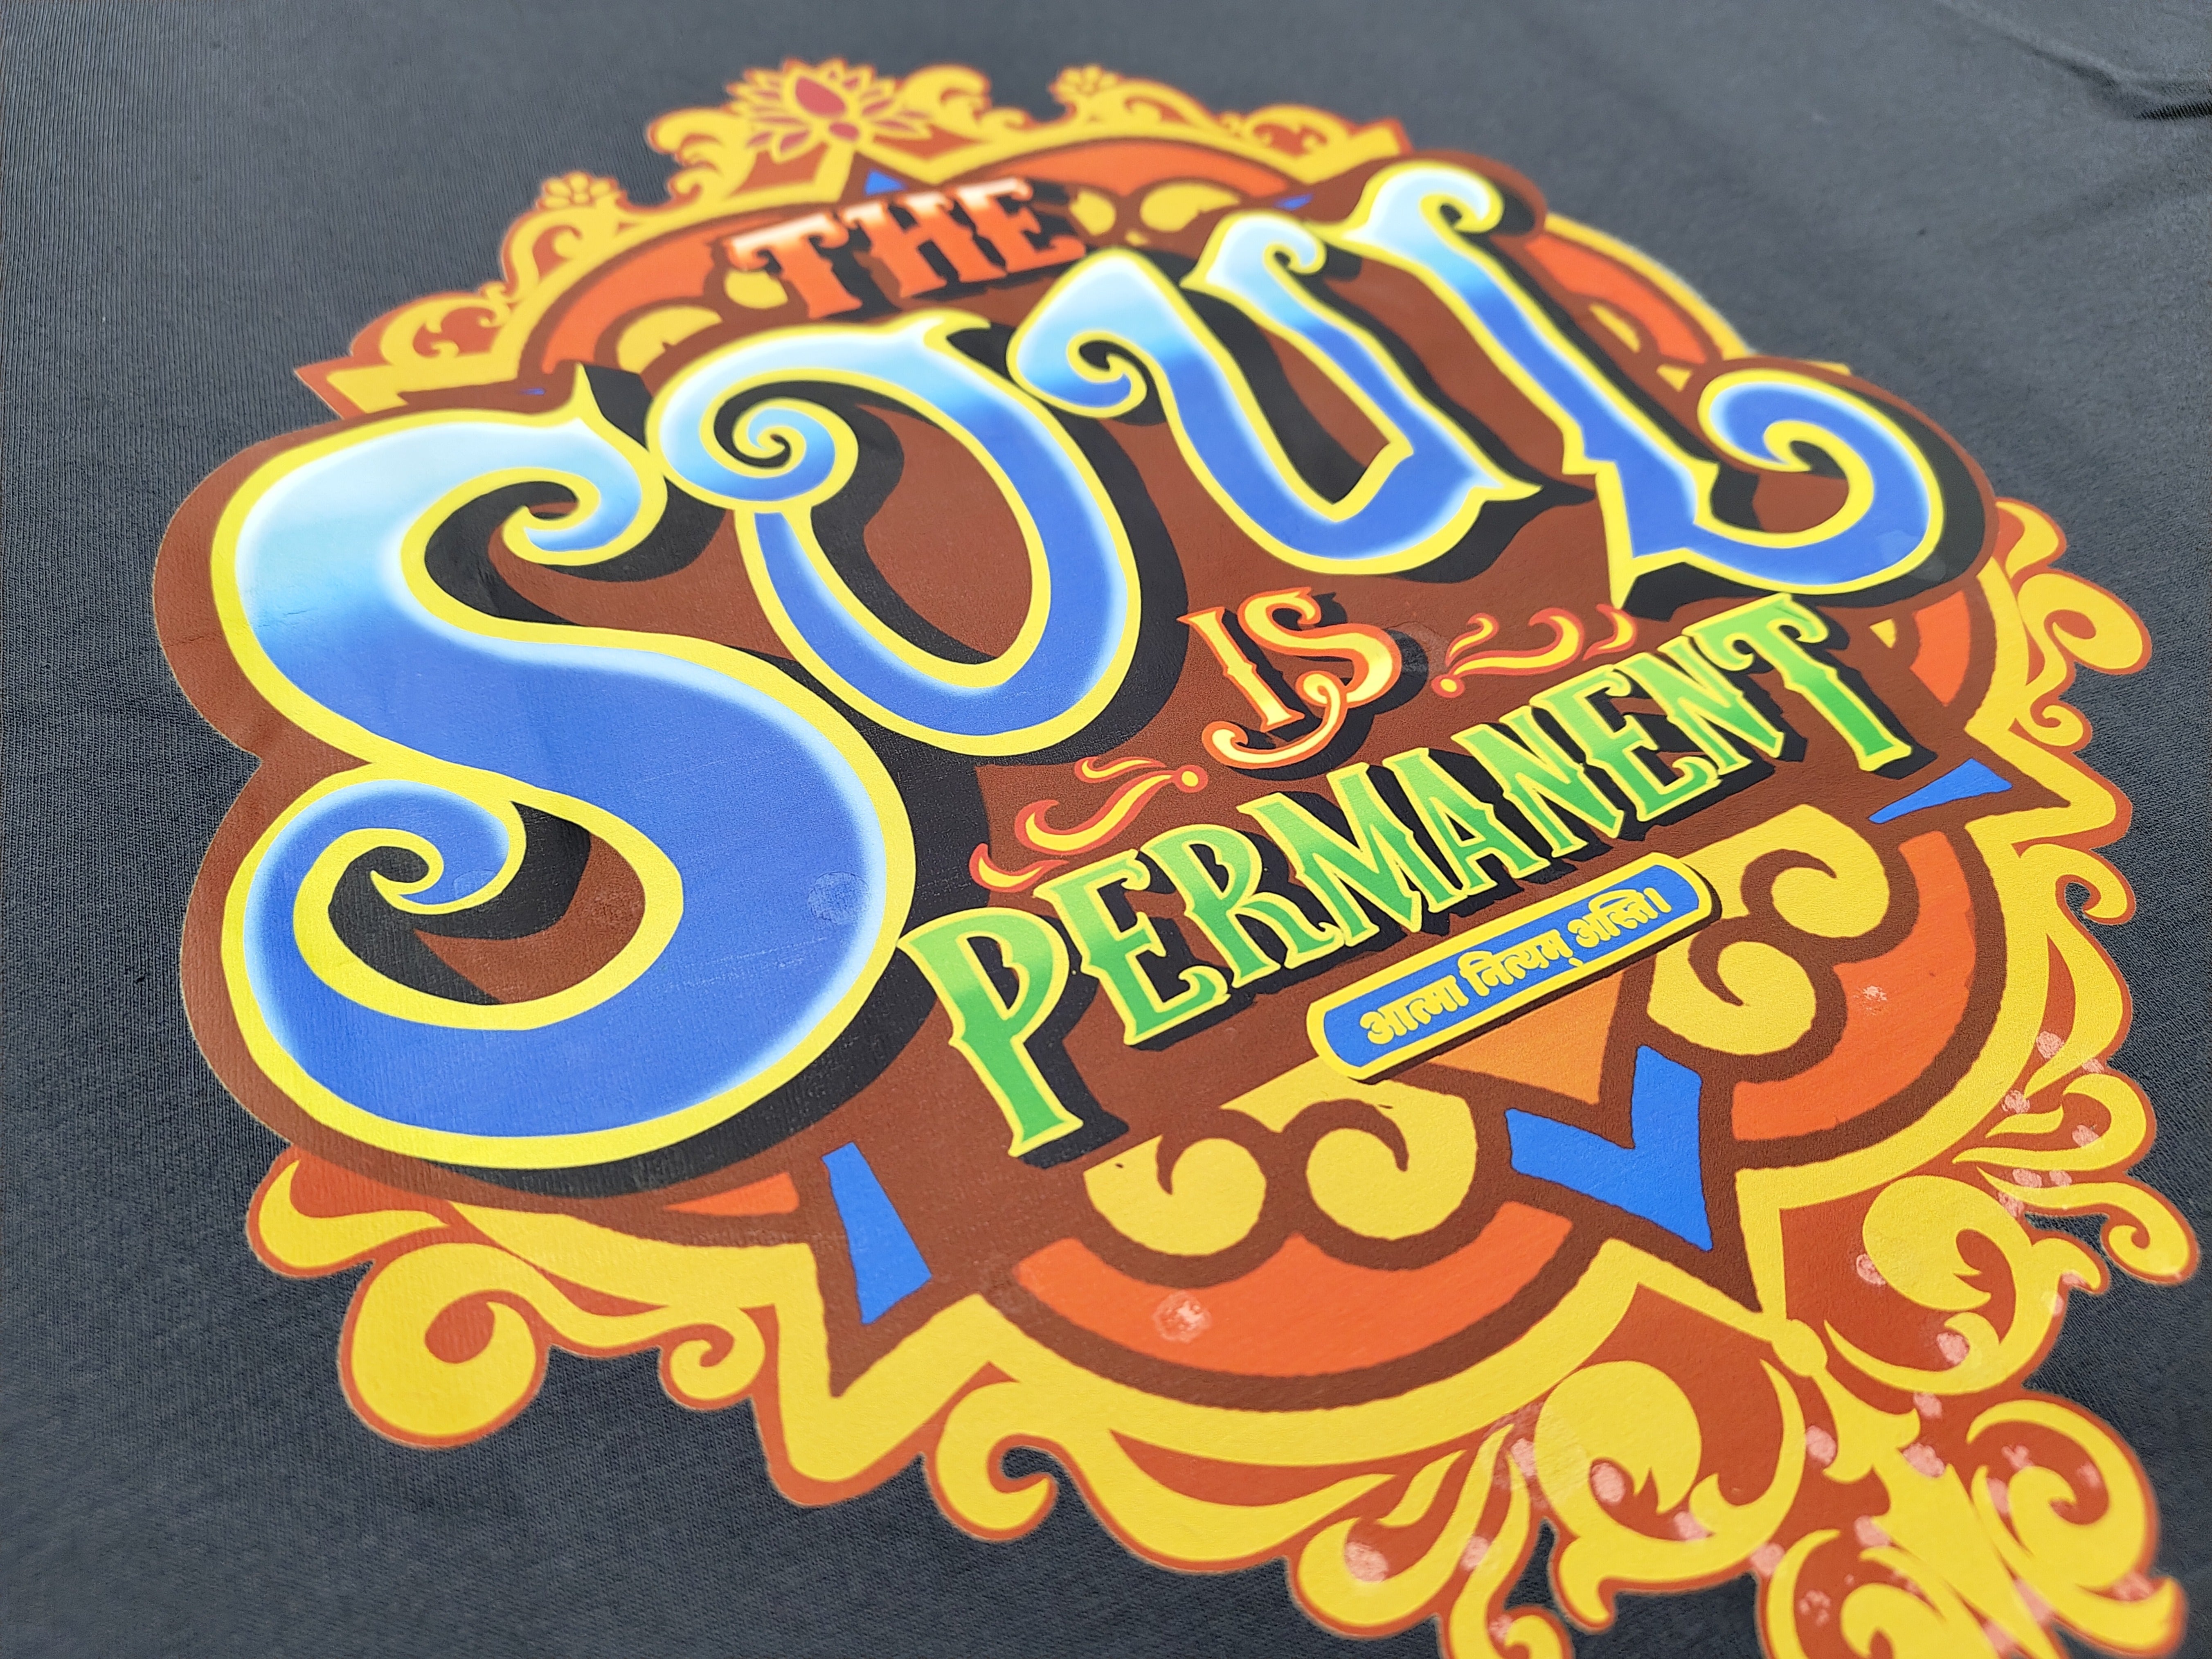 The Soul is Permanent Oversized Tshirt